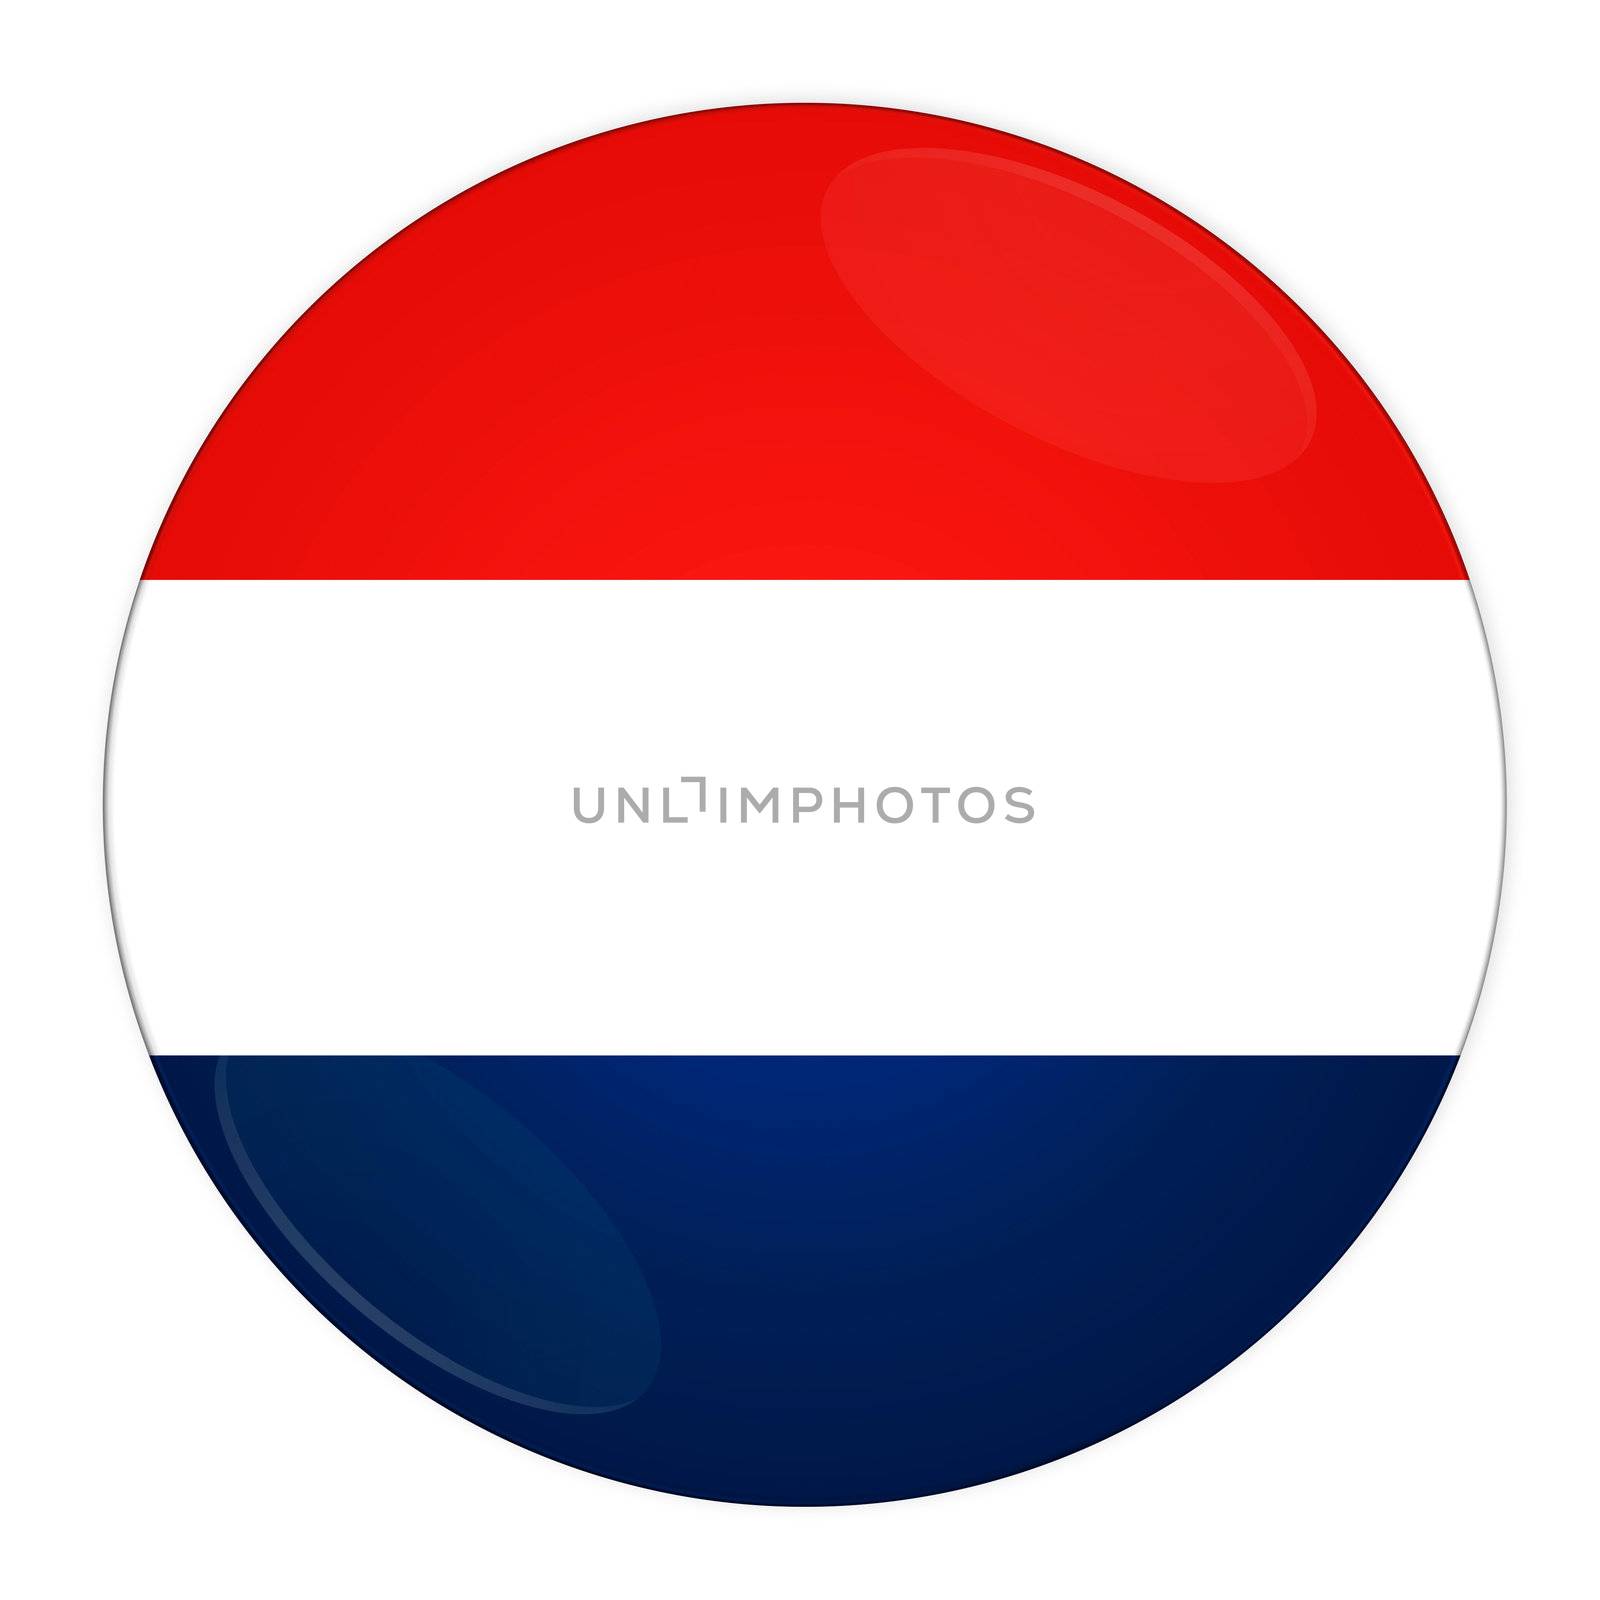 Netherlands button with flag by rusak